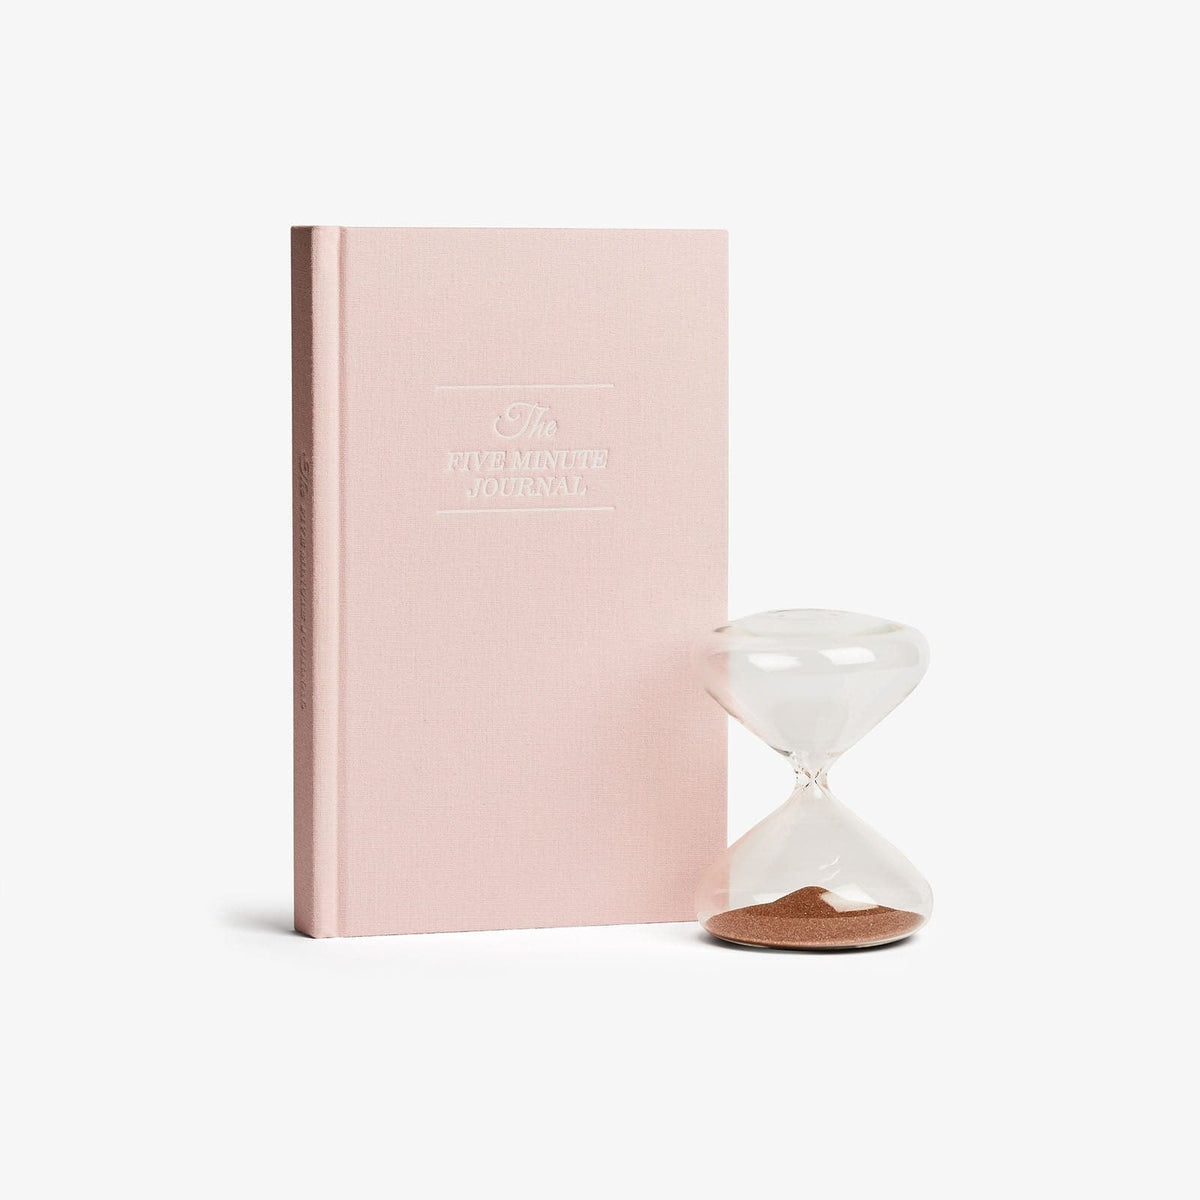 Intelligent Change The Five Minute Journal in Blush Pink